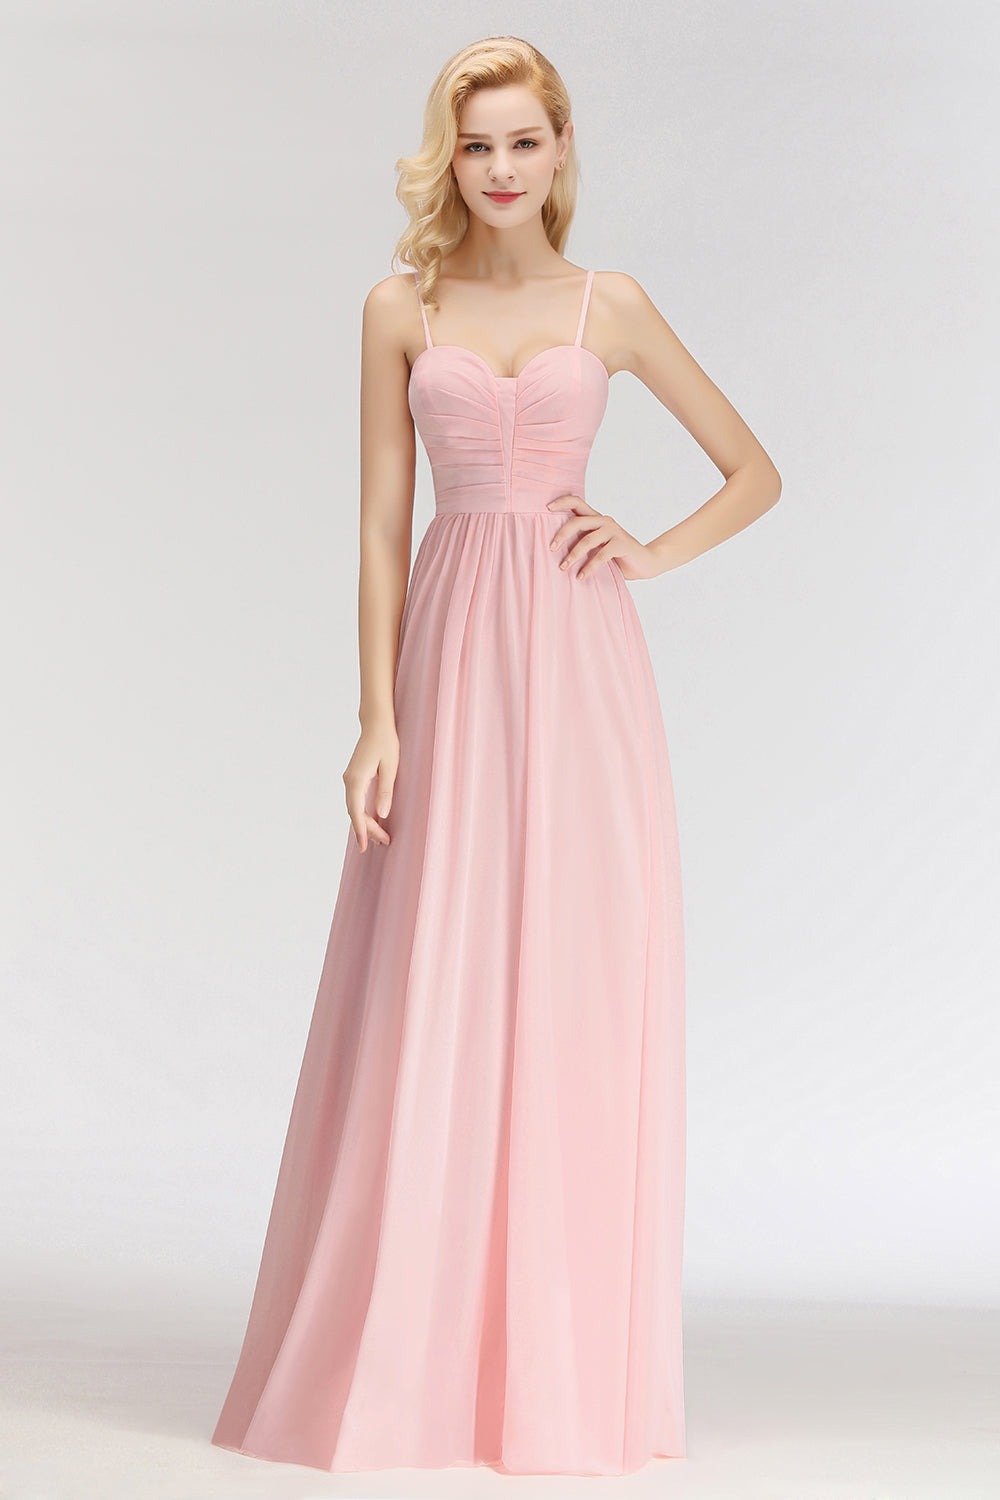 Load image into Gallery viewer, Chiffon Spaghetti-Straps Sleeveless Affordable Bridesmaid Dress Online-27dress
